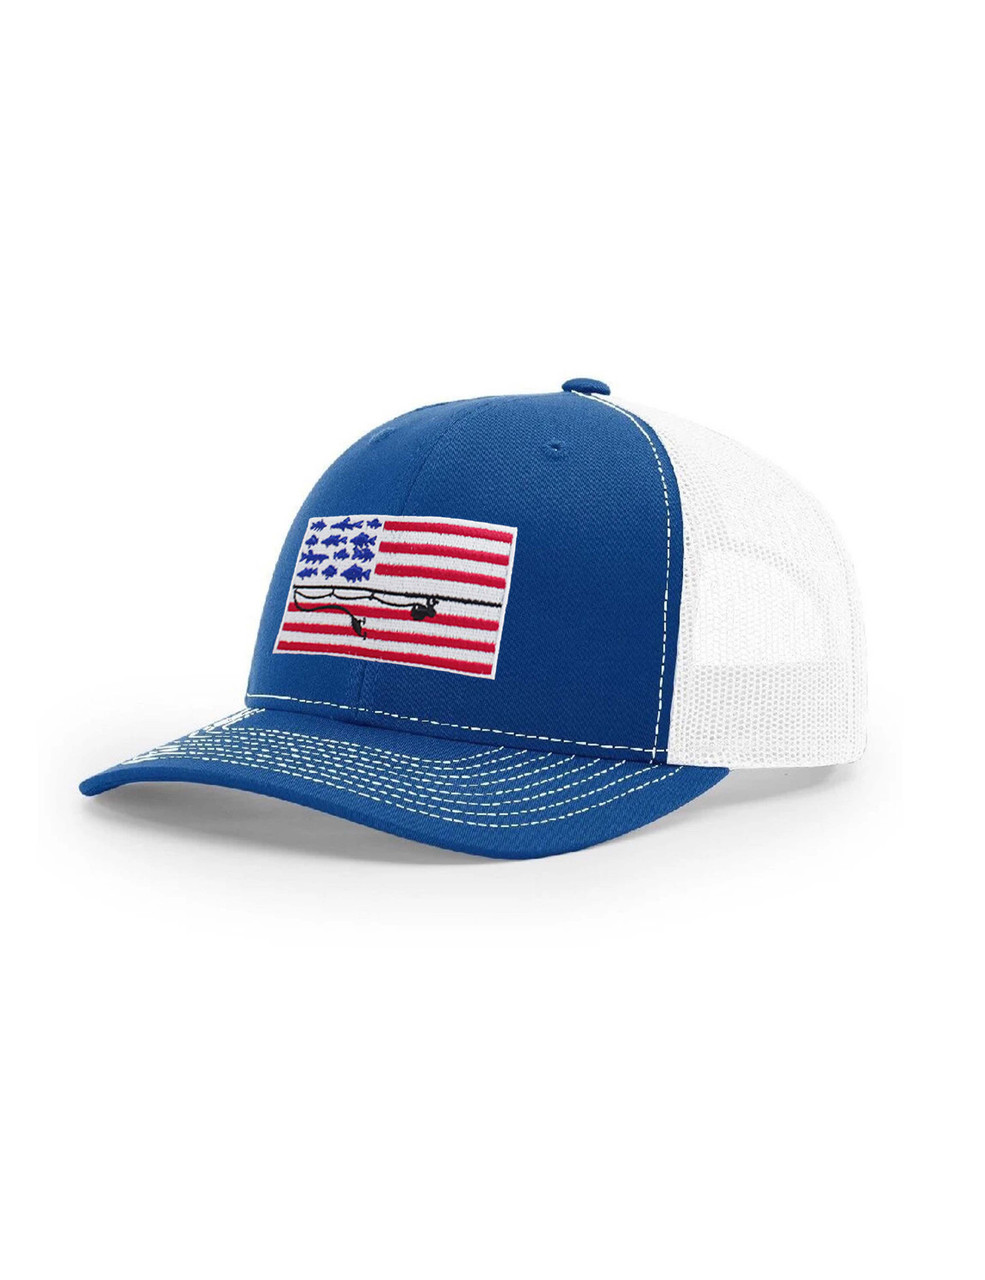 FishME Patch Trucker Hat Royal/White